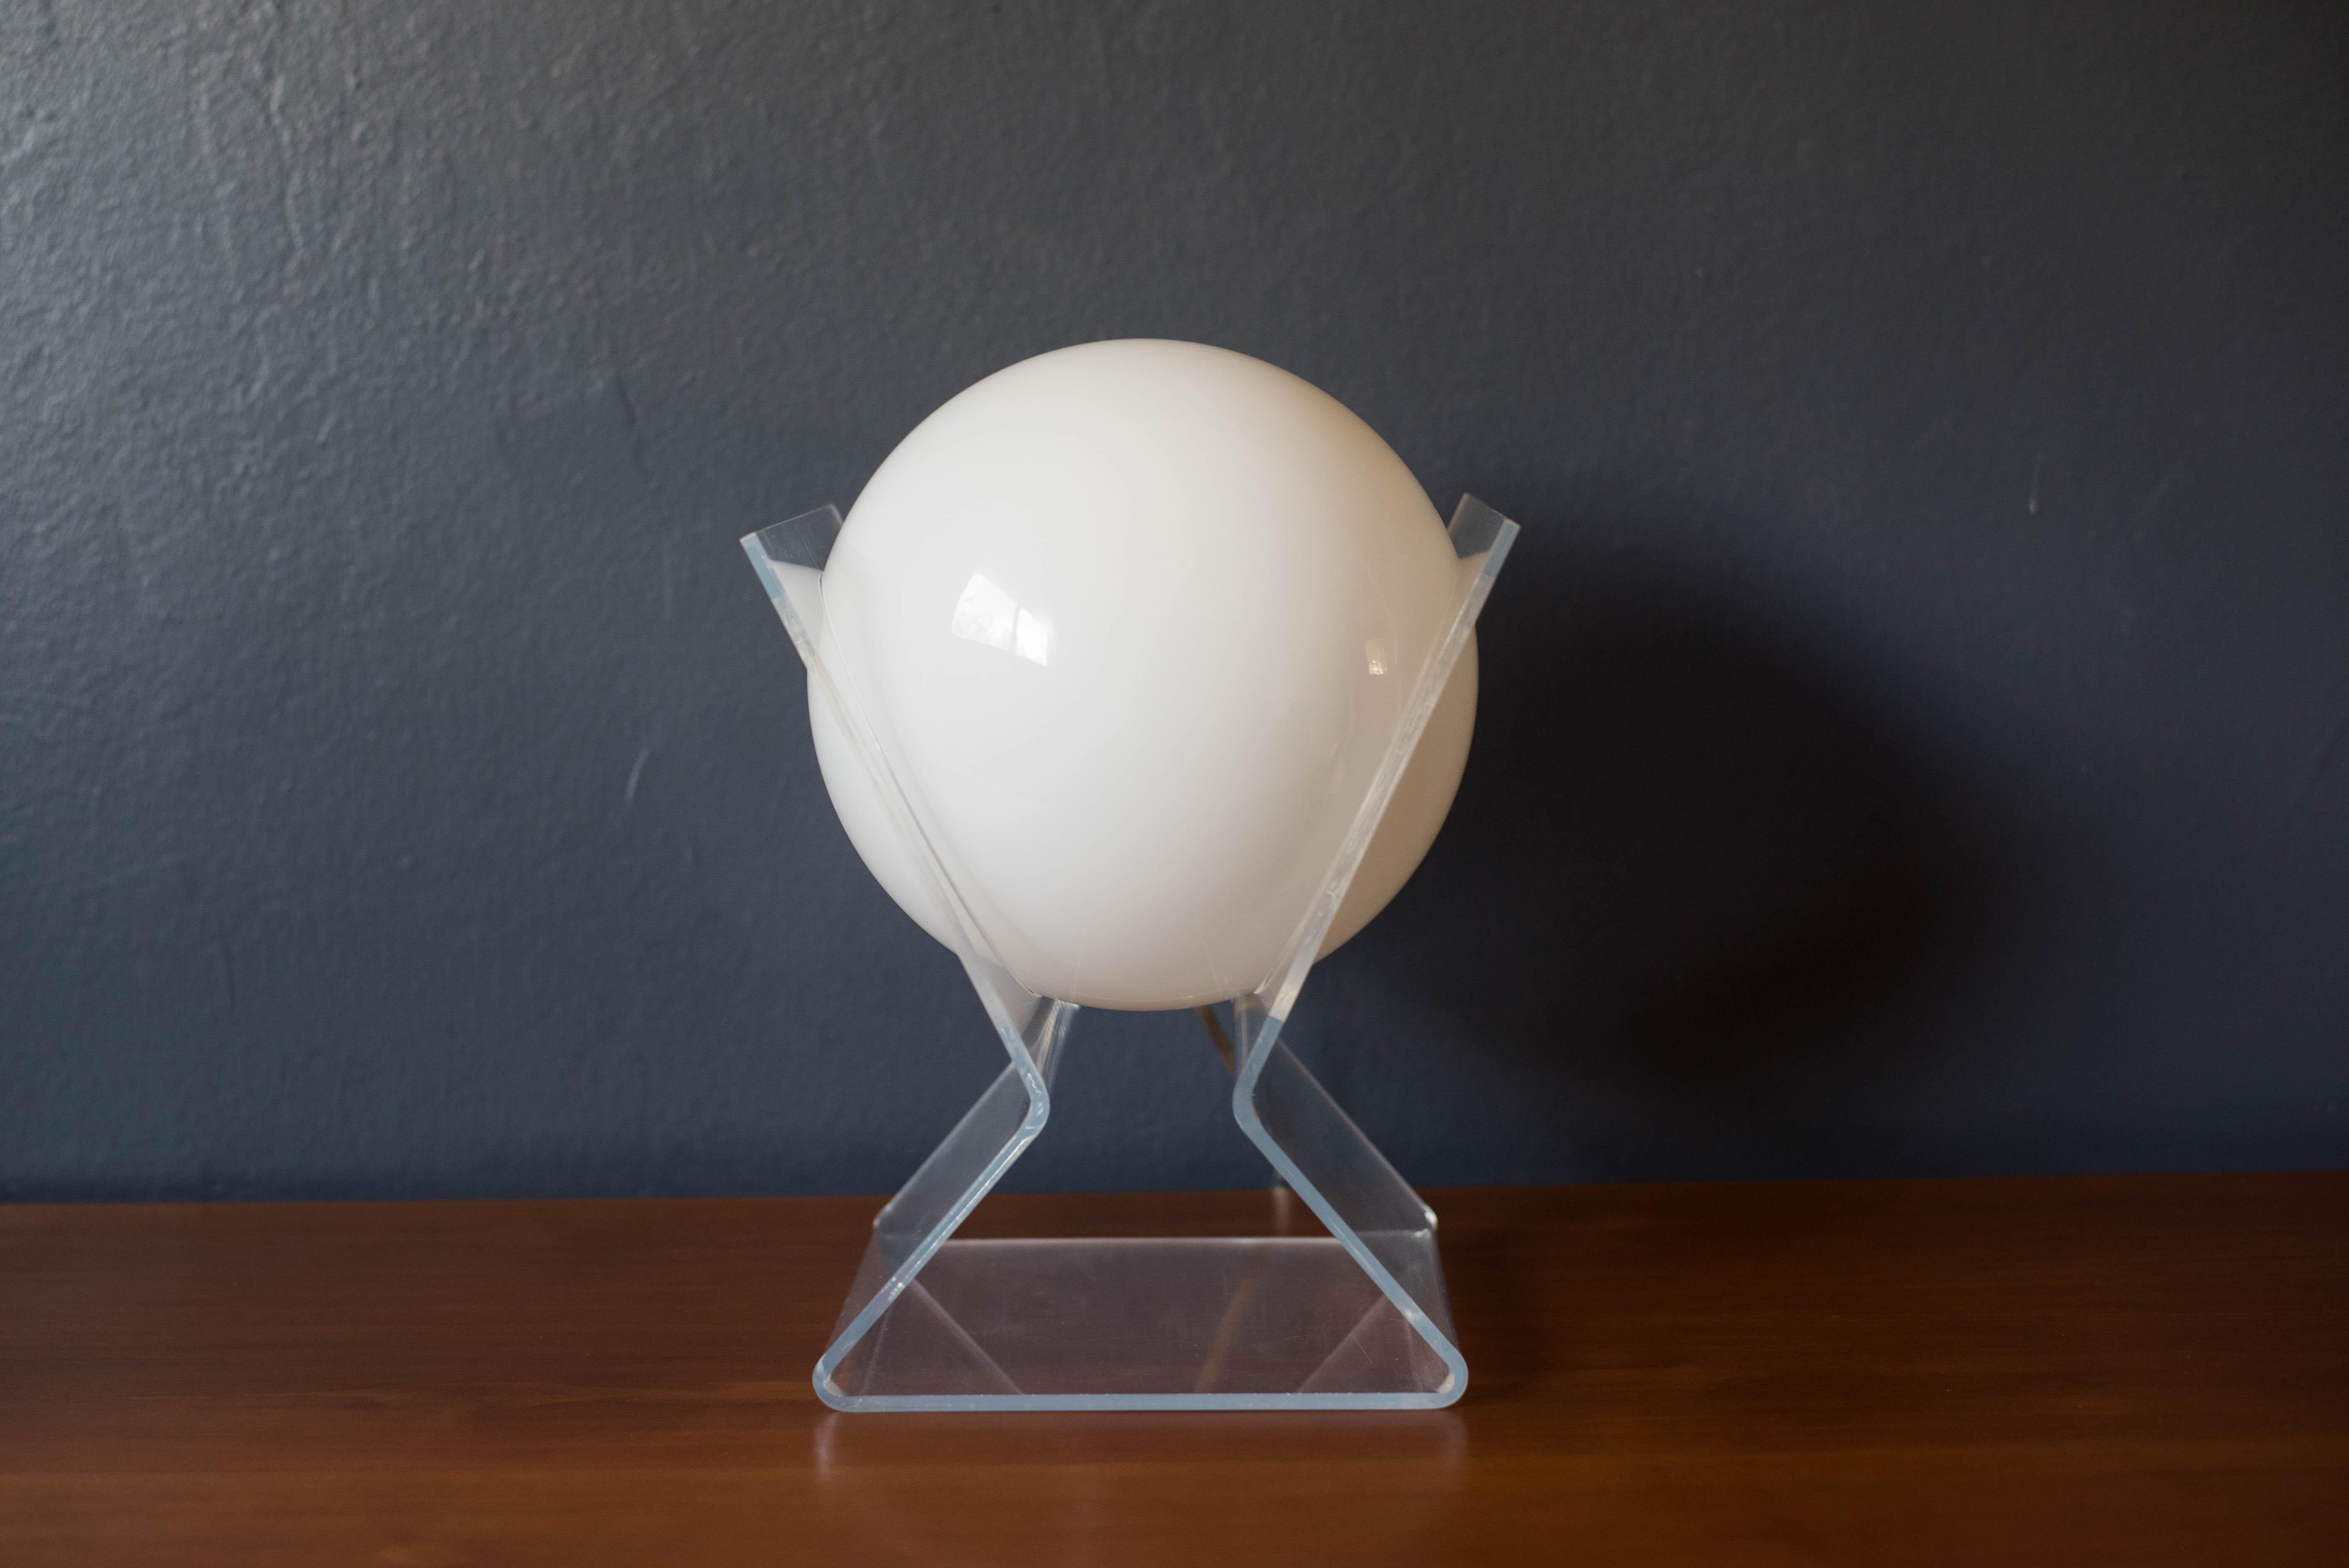 Mid-Century Modern accent globe table lamp, circa 1970s. This piece features a floating moon glass globe that emits a soft glow supported by a lucite angular frame. 


